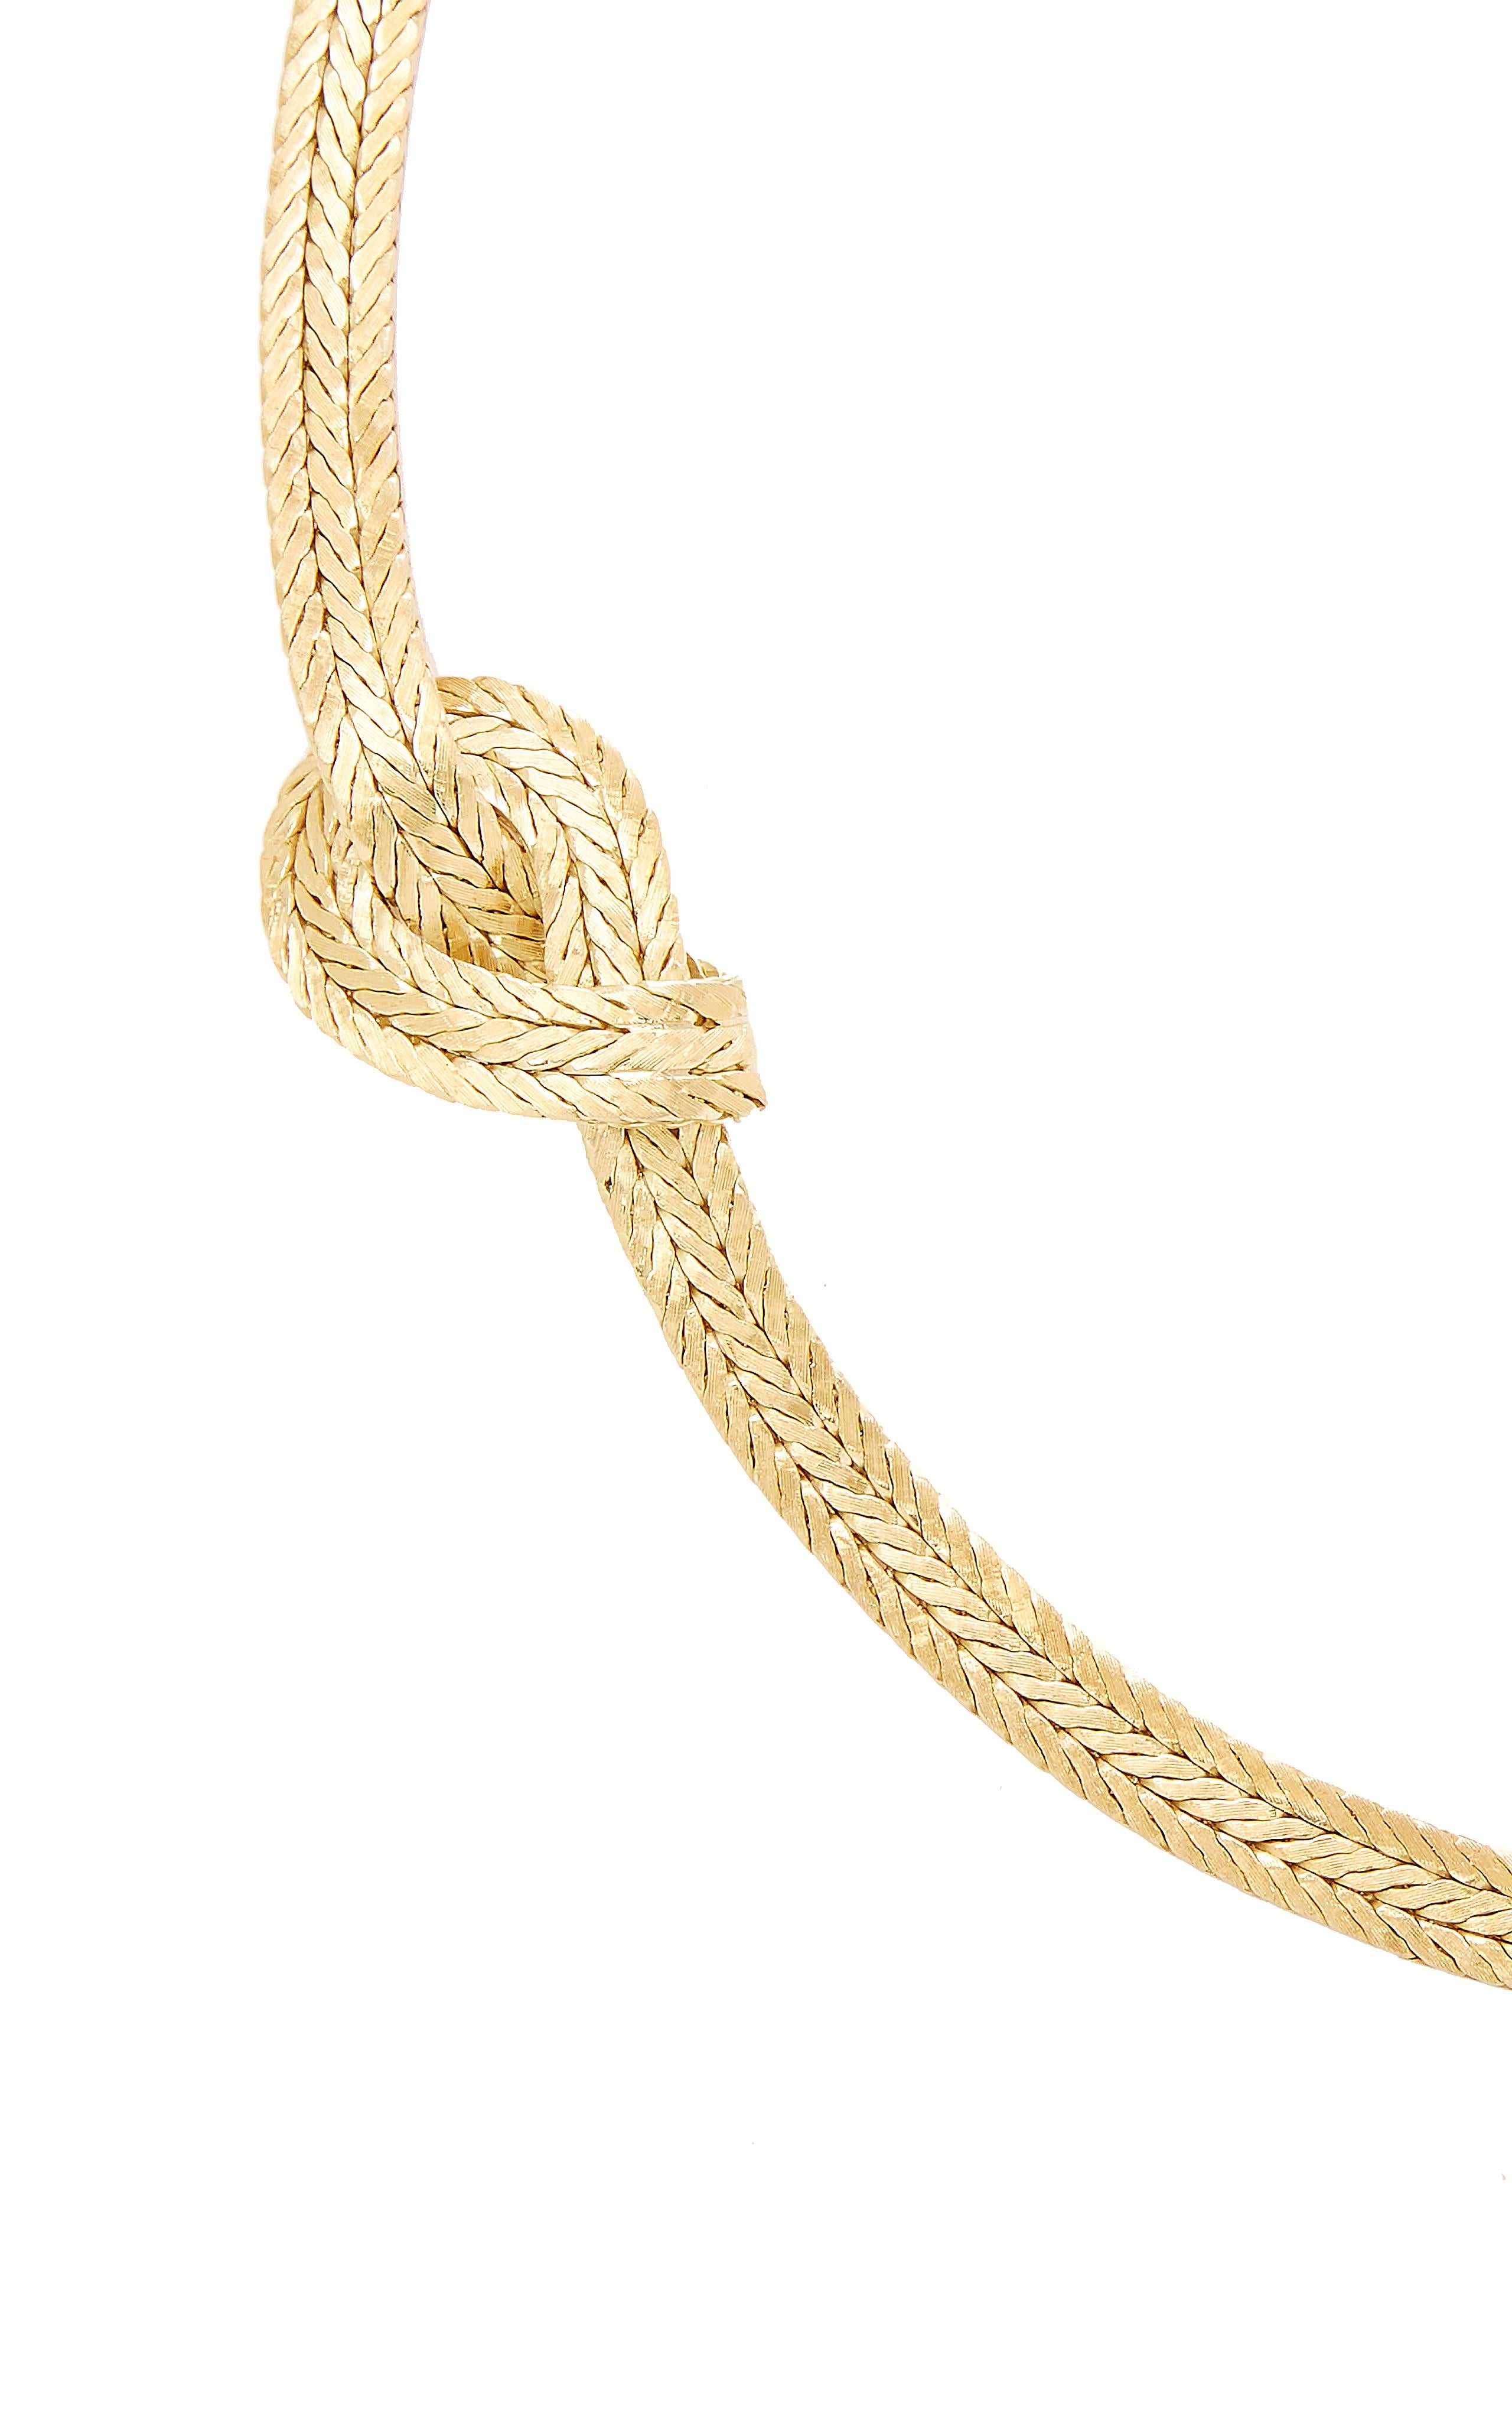 The Italian Jewellery House of Buccellati - everything they create is fashionable, iconic and so desirable. This chic and stylish necklace is finely crafted in 18k yellow gold in a detailed triple row herringbone design complete with two large knots